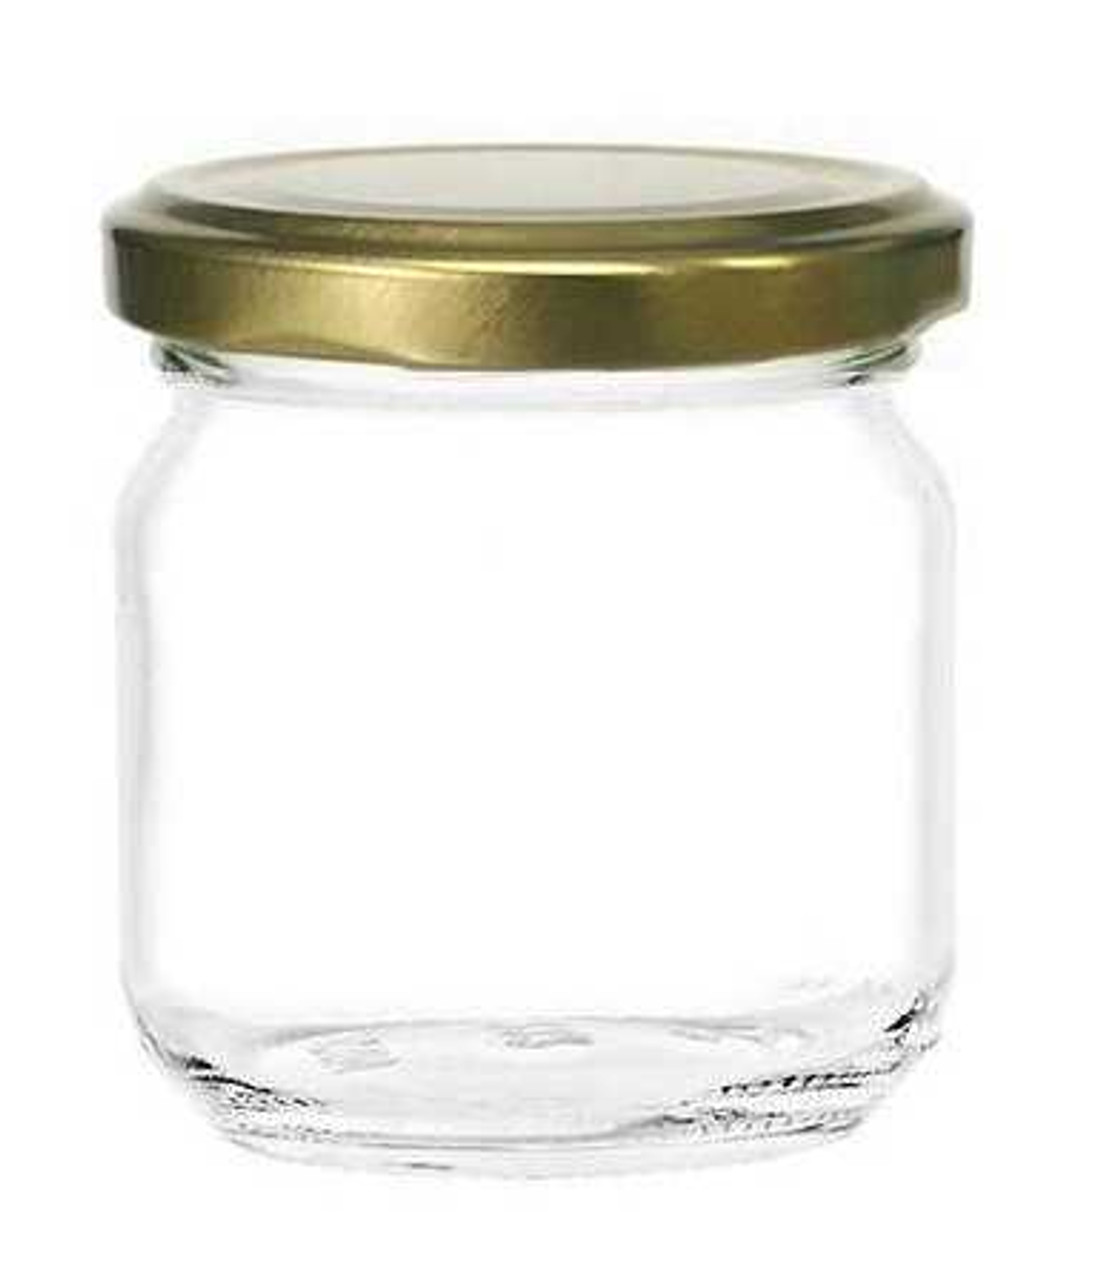 https://cdn11.bigcommerce.com/s-1ybtx/images/stencil/1280x1280/products/442/5460/675-oz-Low-Profile-Square-Glass-Jar-Made-in-Italy_1451__12969.1699987893.jpg?c=2?imbypass=on